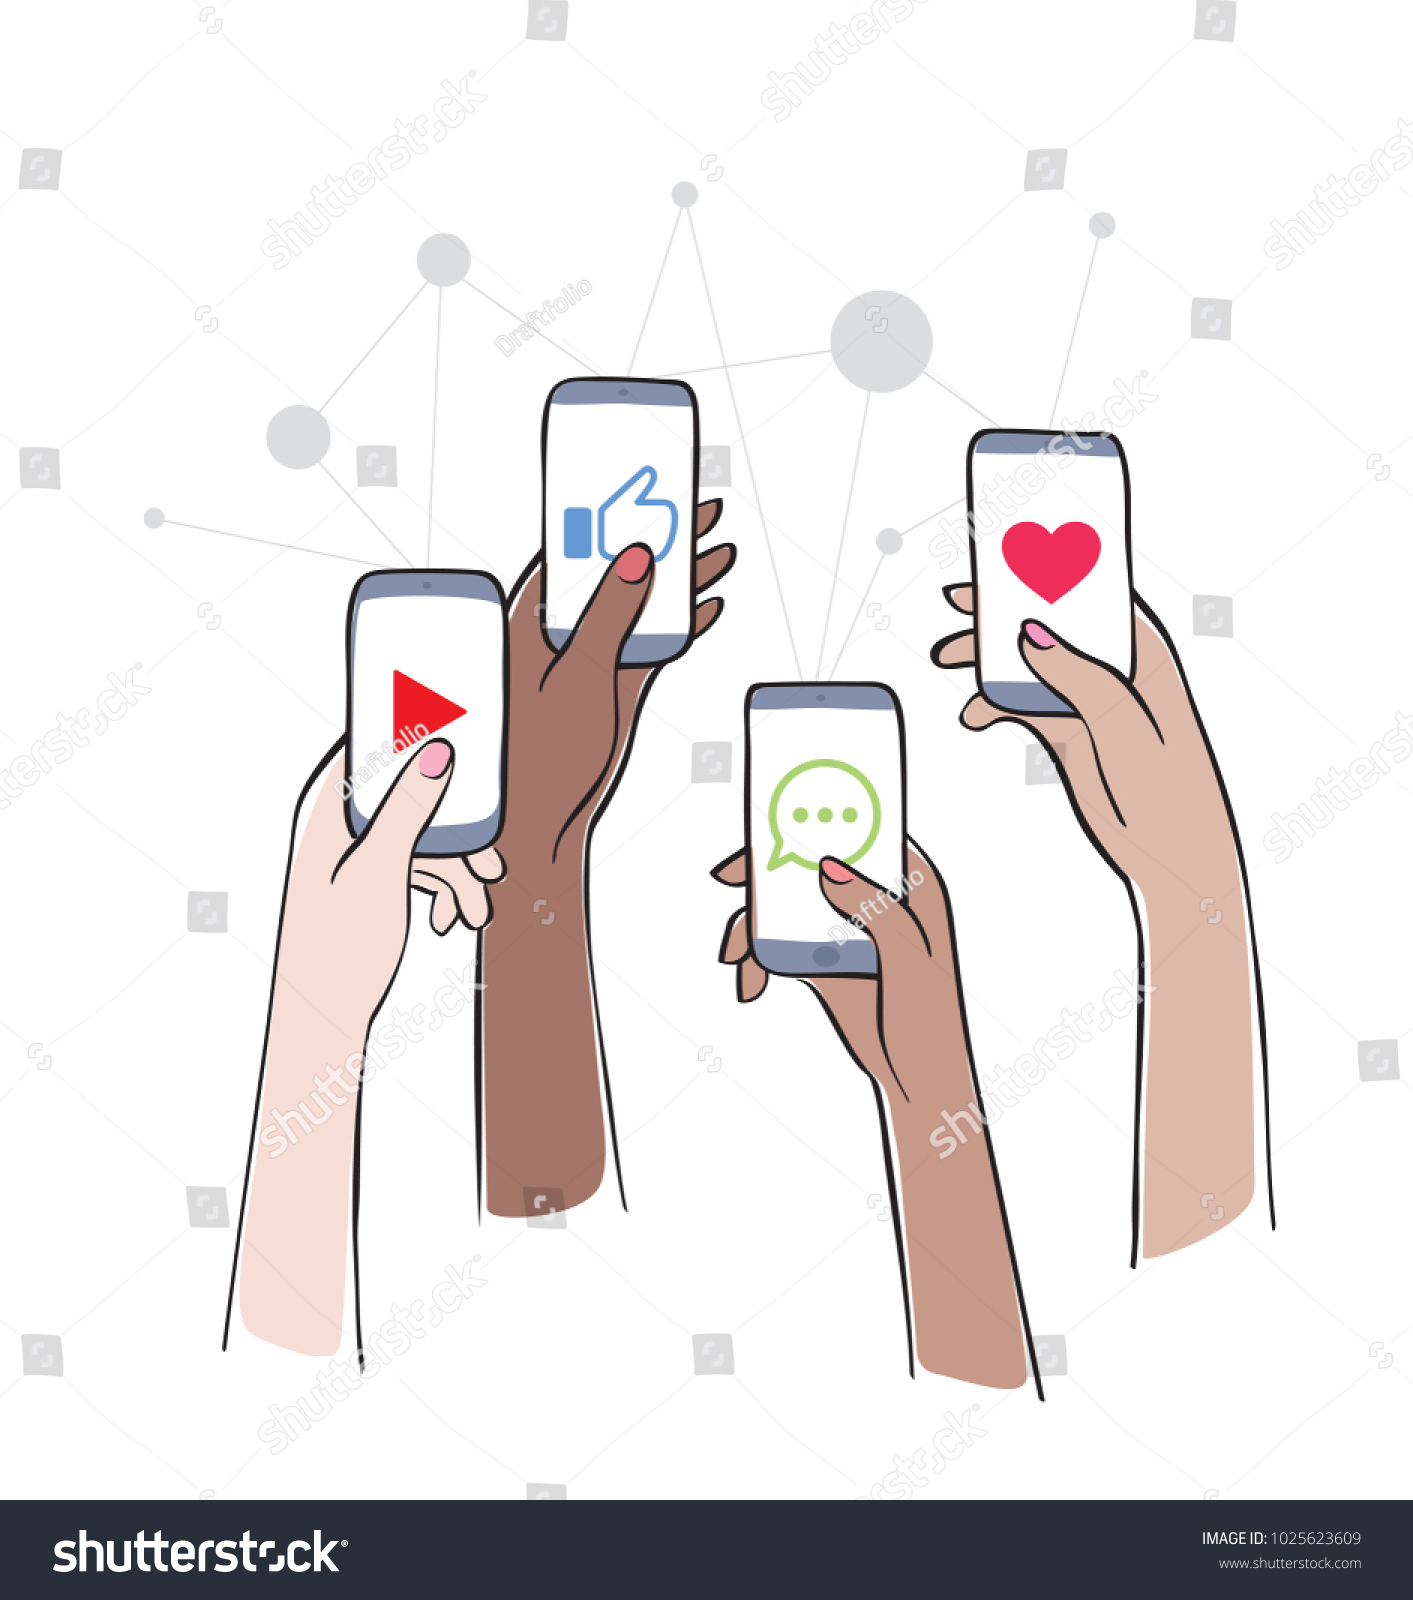 Social Network - Friends Interacting on Social Media
Women using different social platforms. Hands holding smartphones with social network apps icons. Online communication and connection. #1025623609